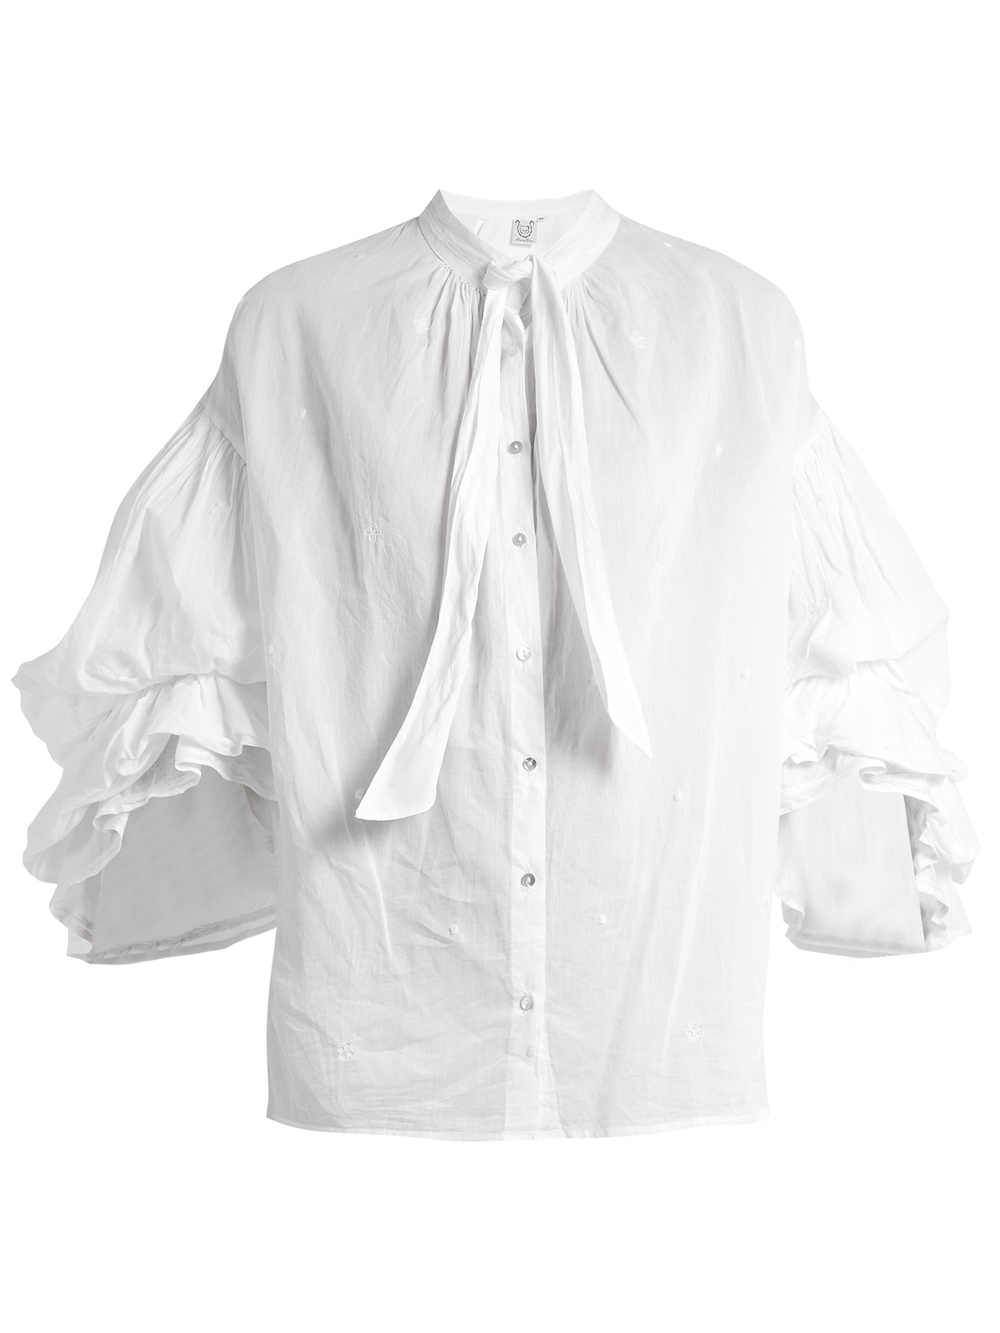 Thierry Colson - Floral-Embroidered Tie-Neck Blouse - White | ABOUT ICONS